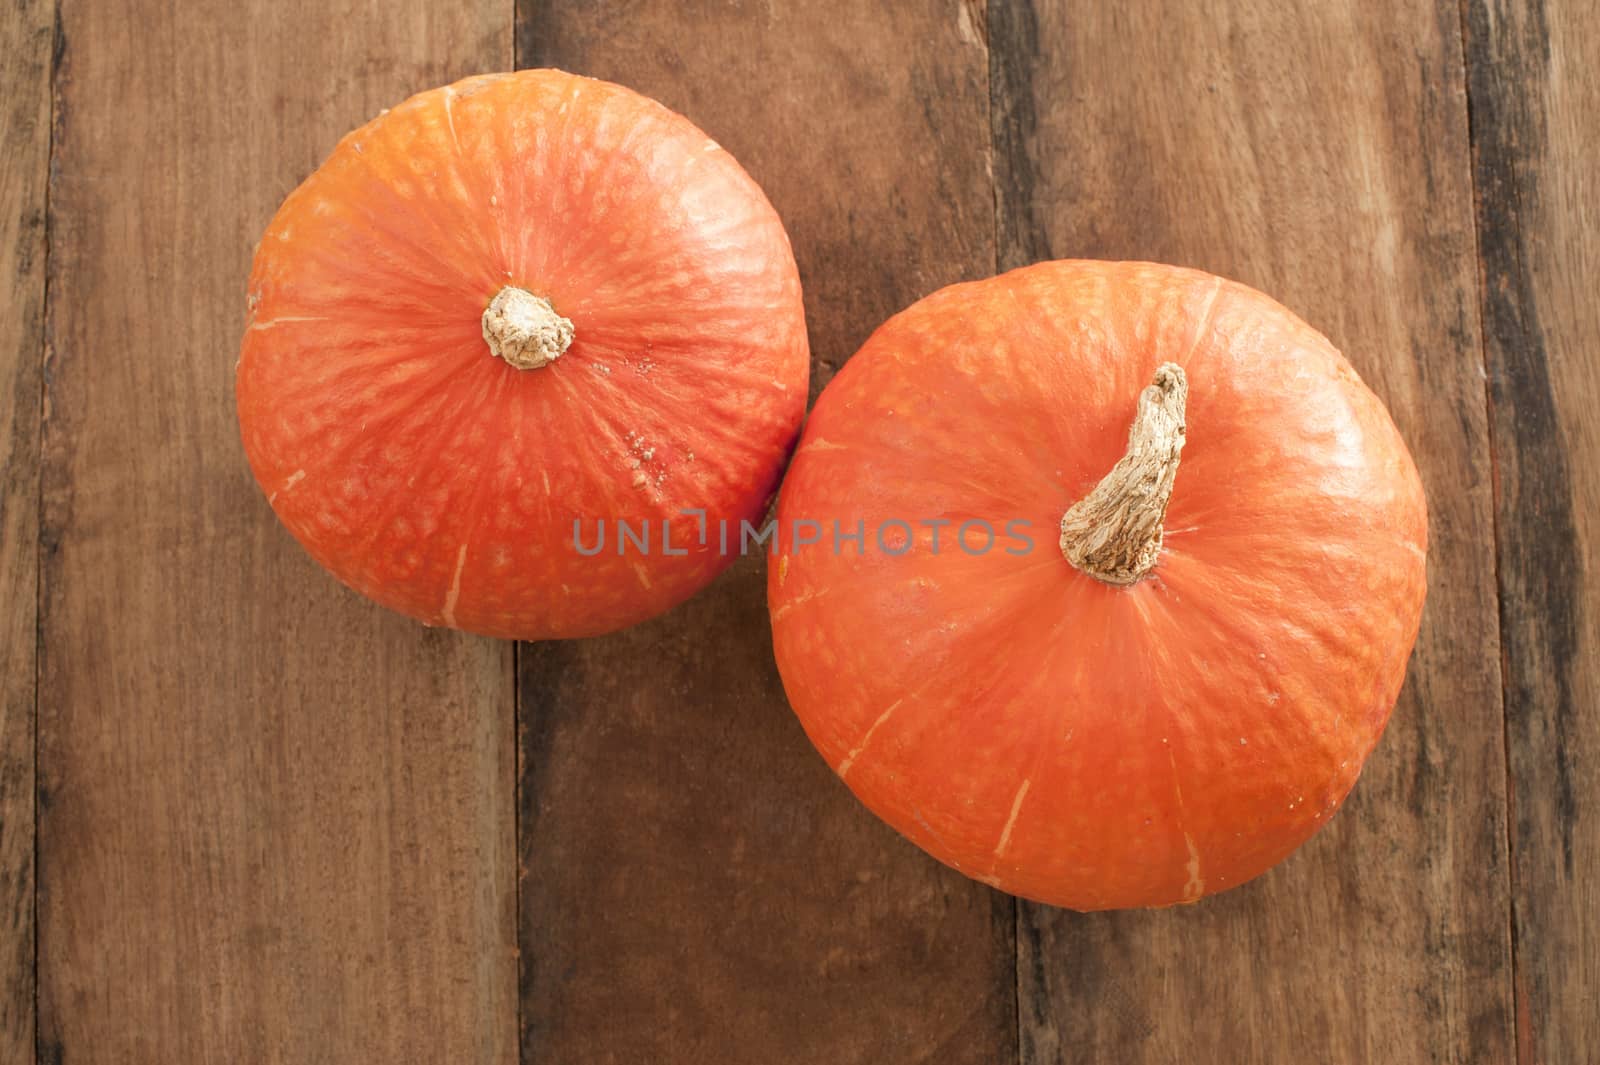 Top down view on small orange pumpkins over wooden background for concept about autumn season produce or Halloween